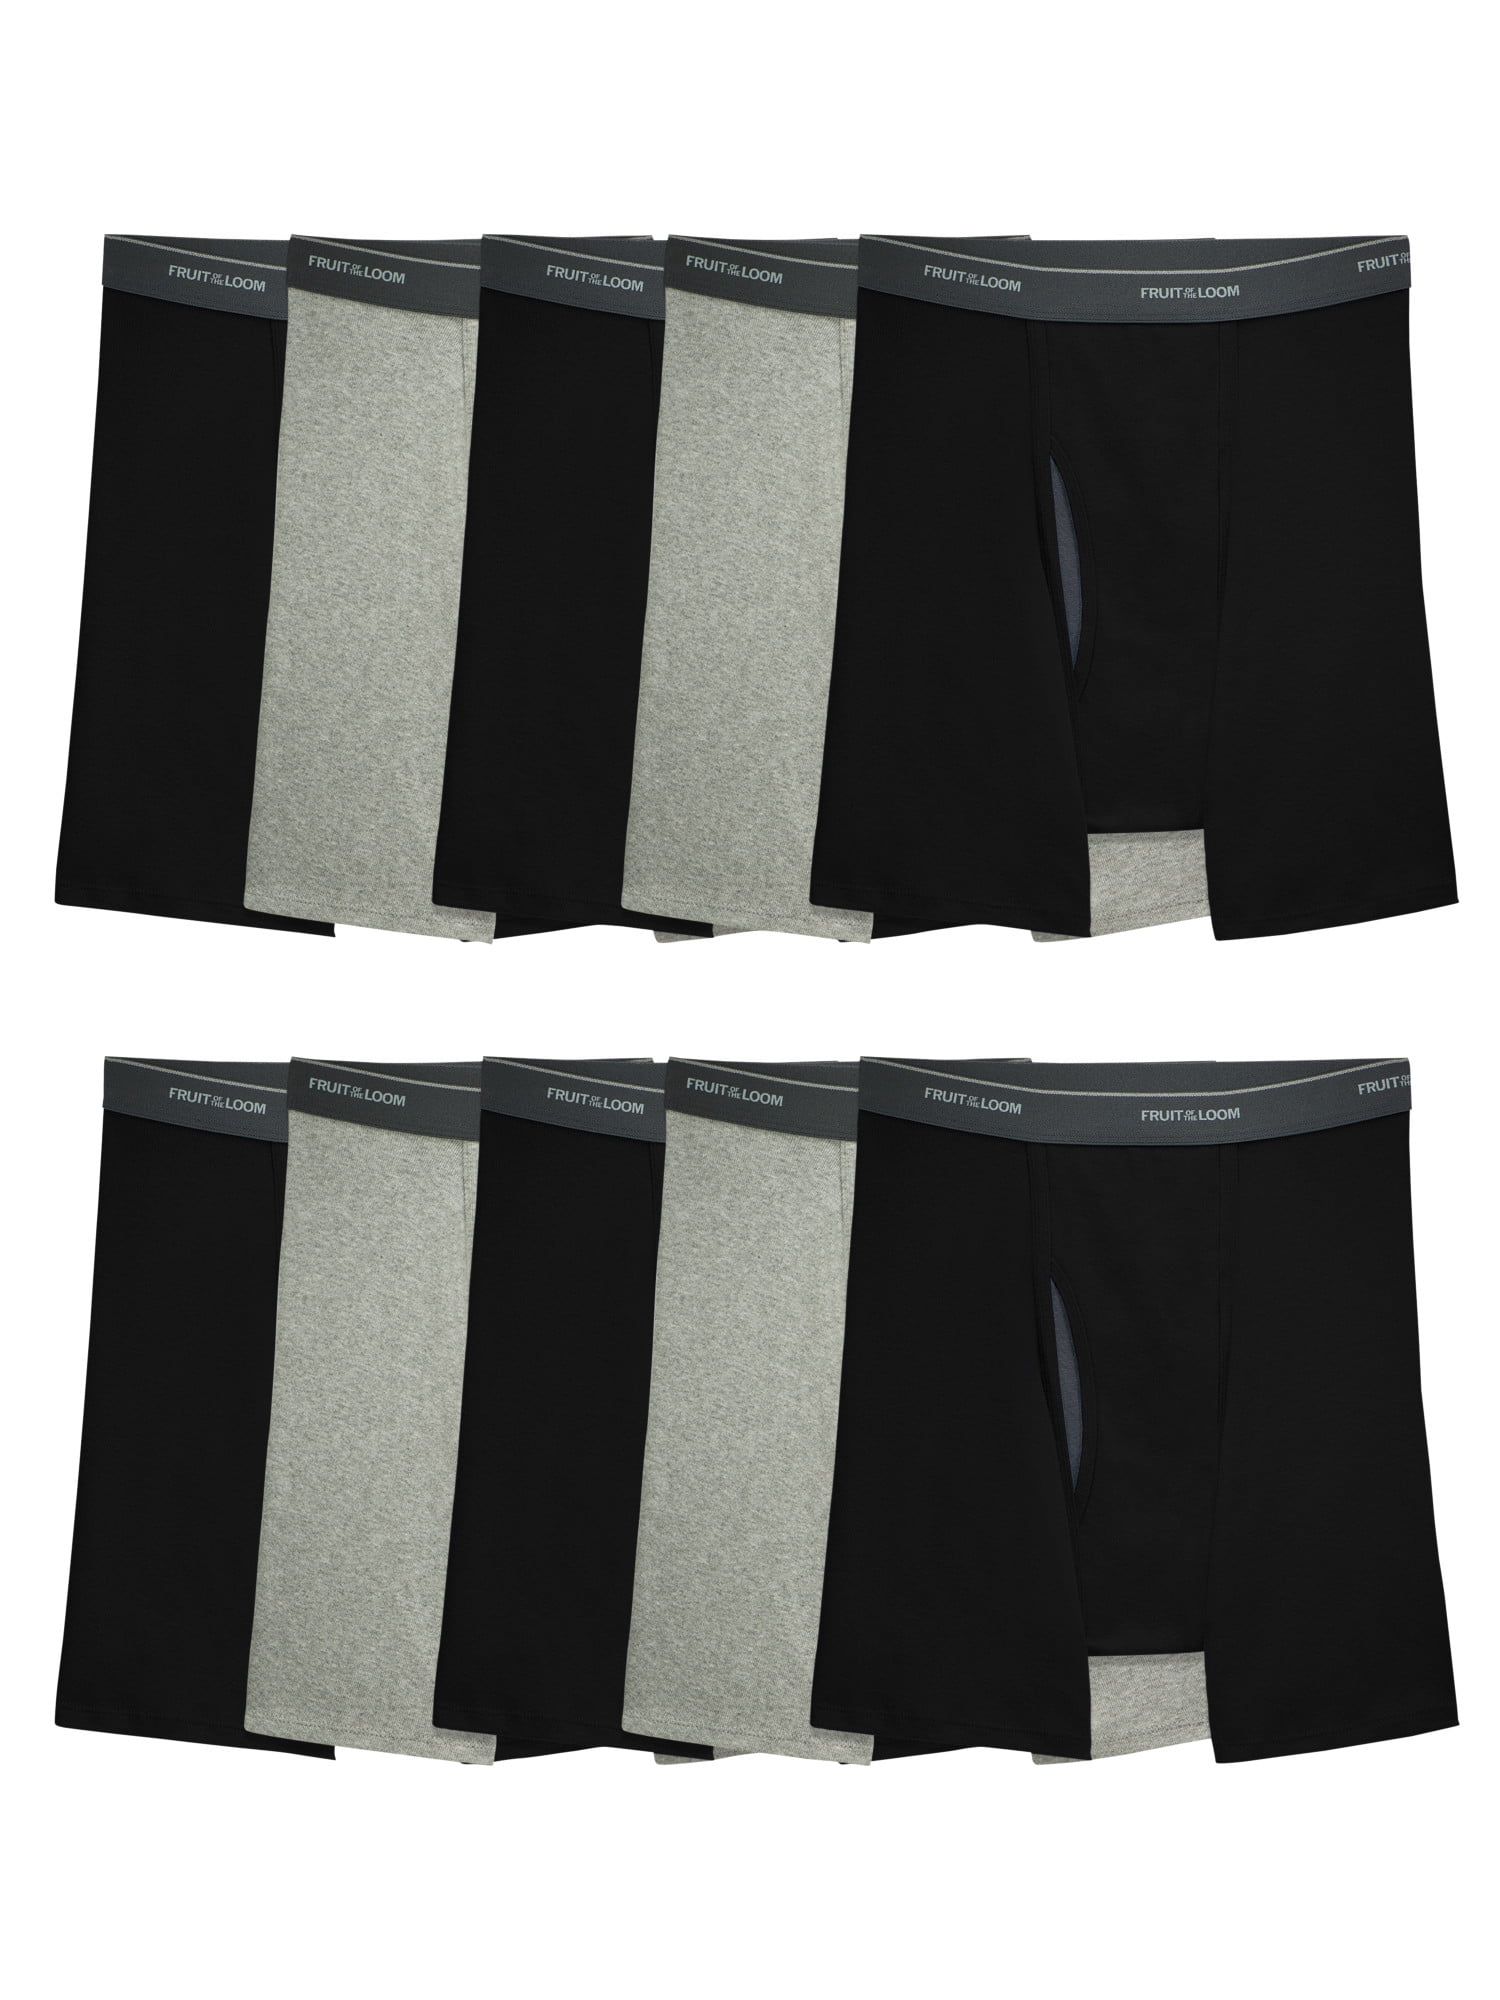 10-Pack Fruit of the Loom Men's CoolZone Boxer Briefs (Black & Gray) $18.98 + Free S&H w/ Walmart+ or $35+